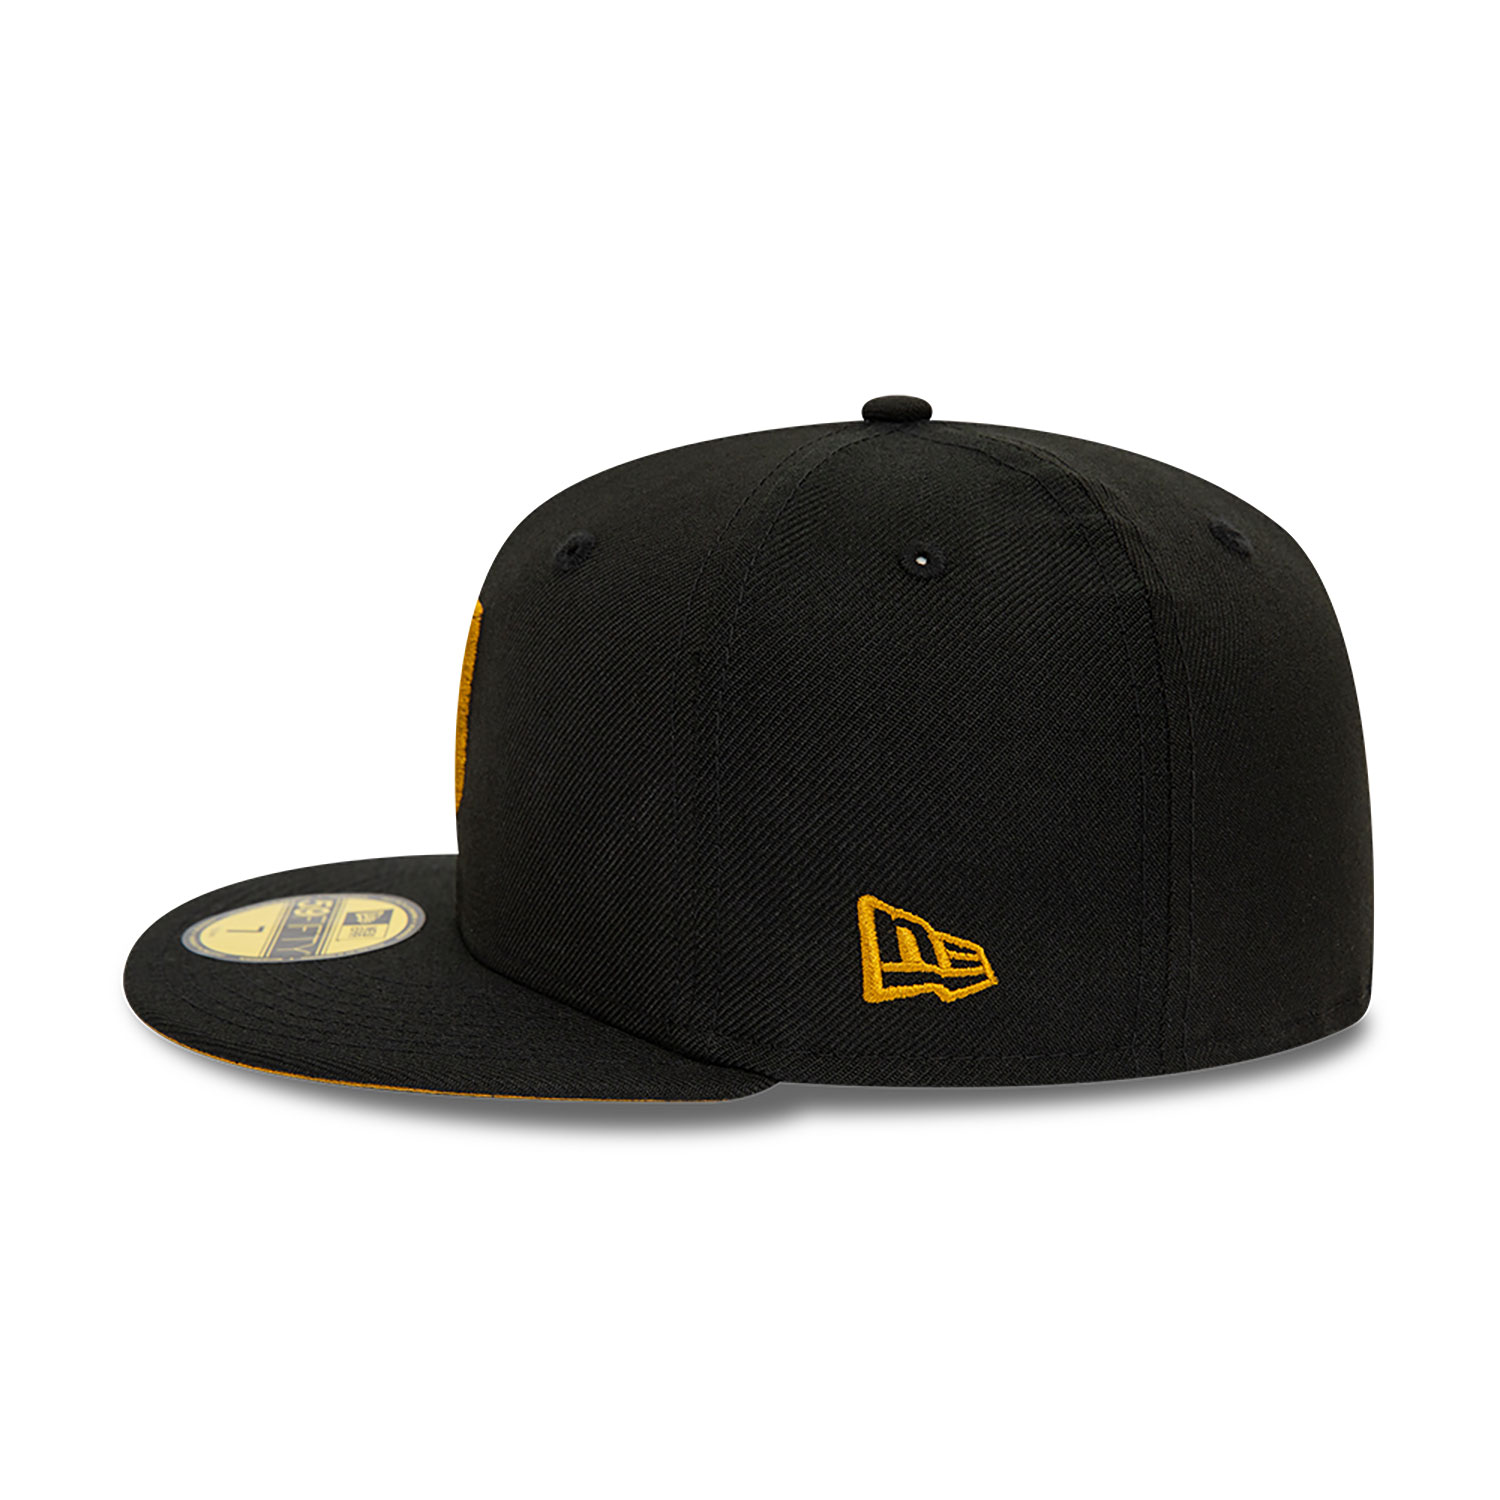 New Era 7 59FIFTY Day Black 59FIFTY Fitted Cap